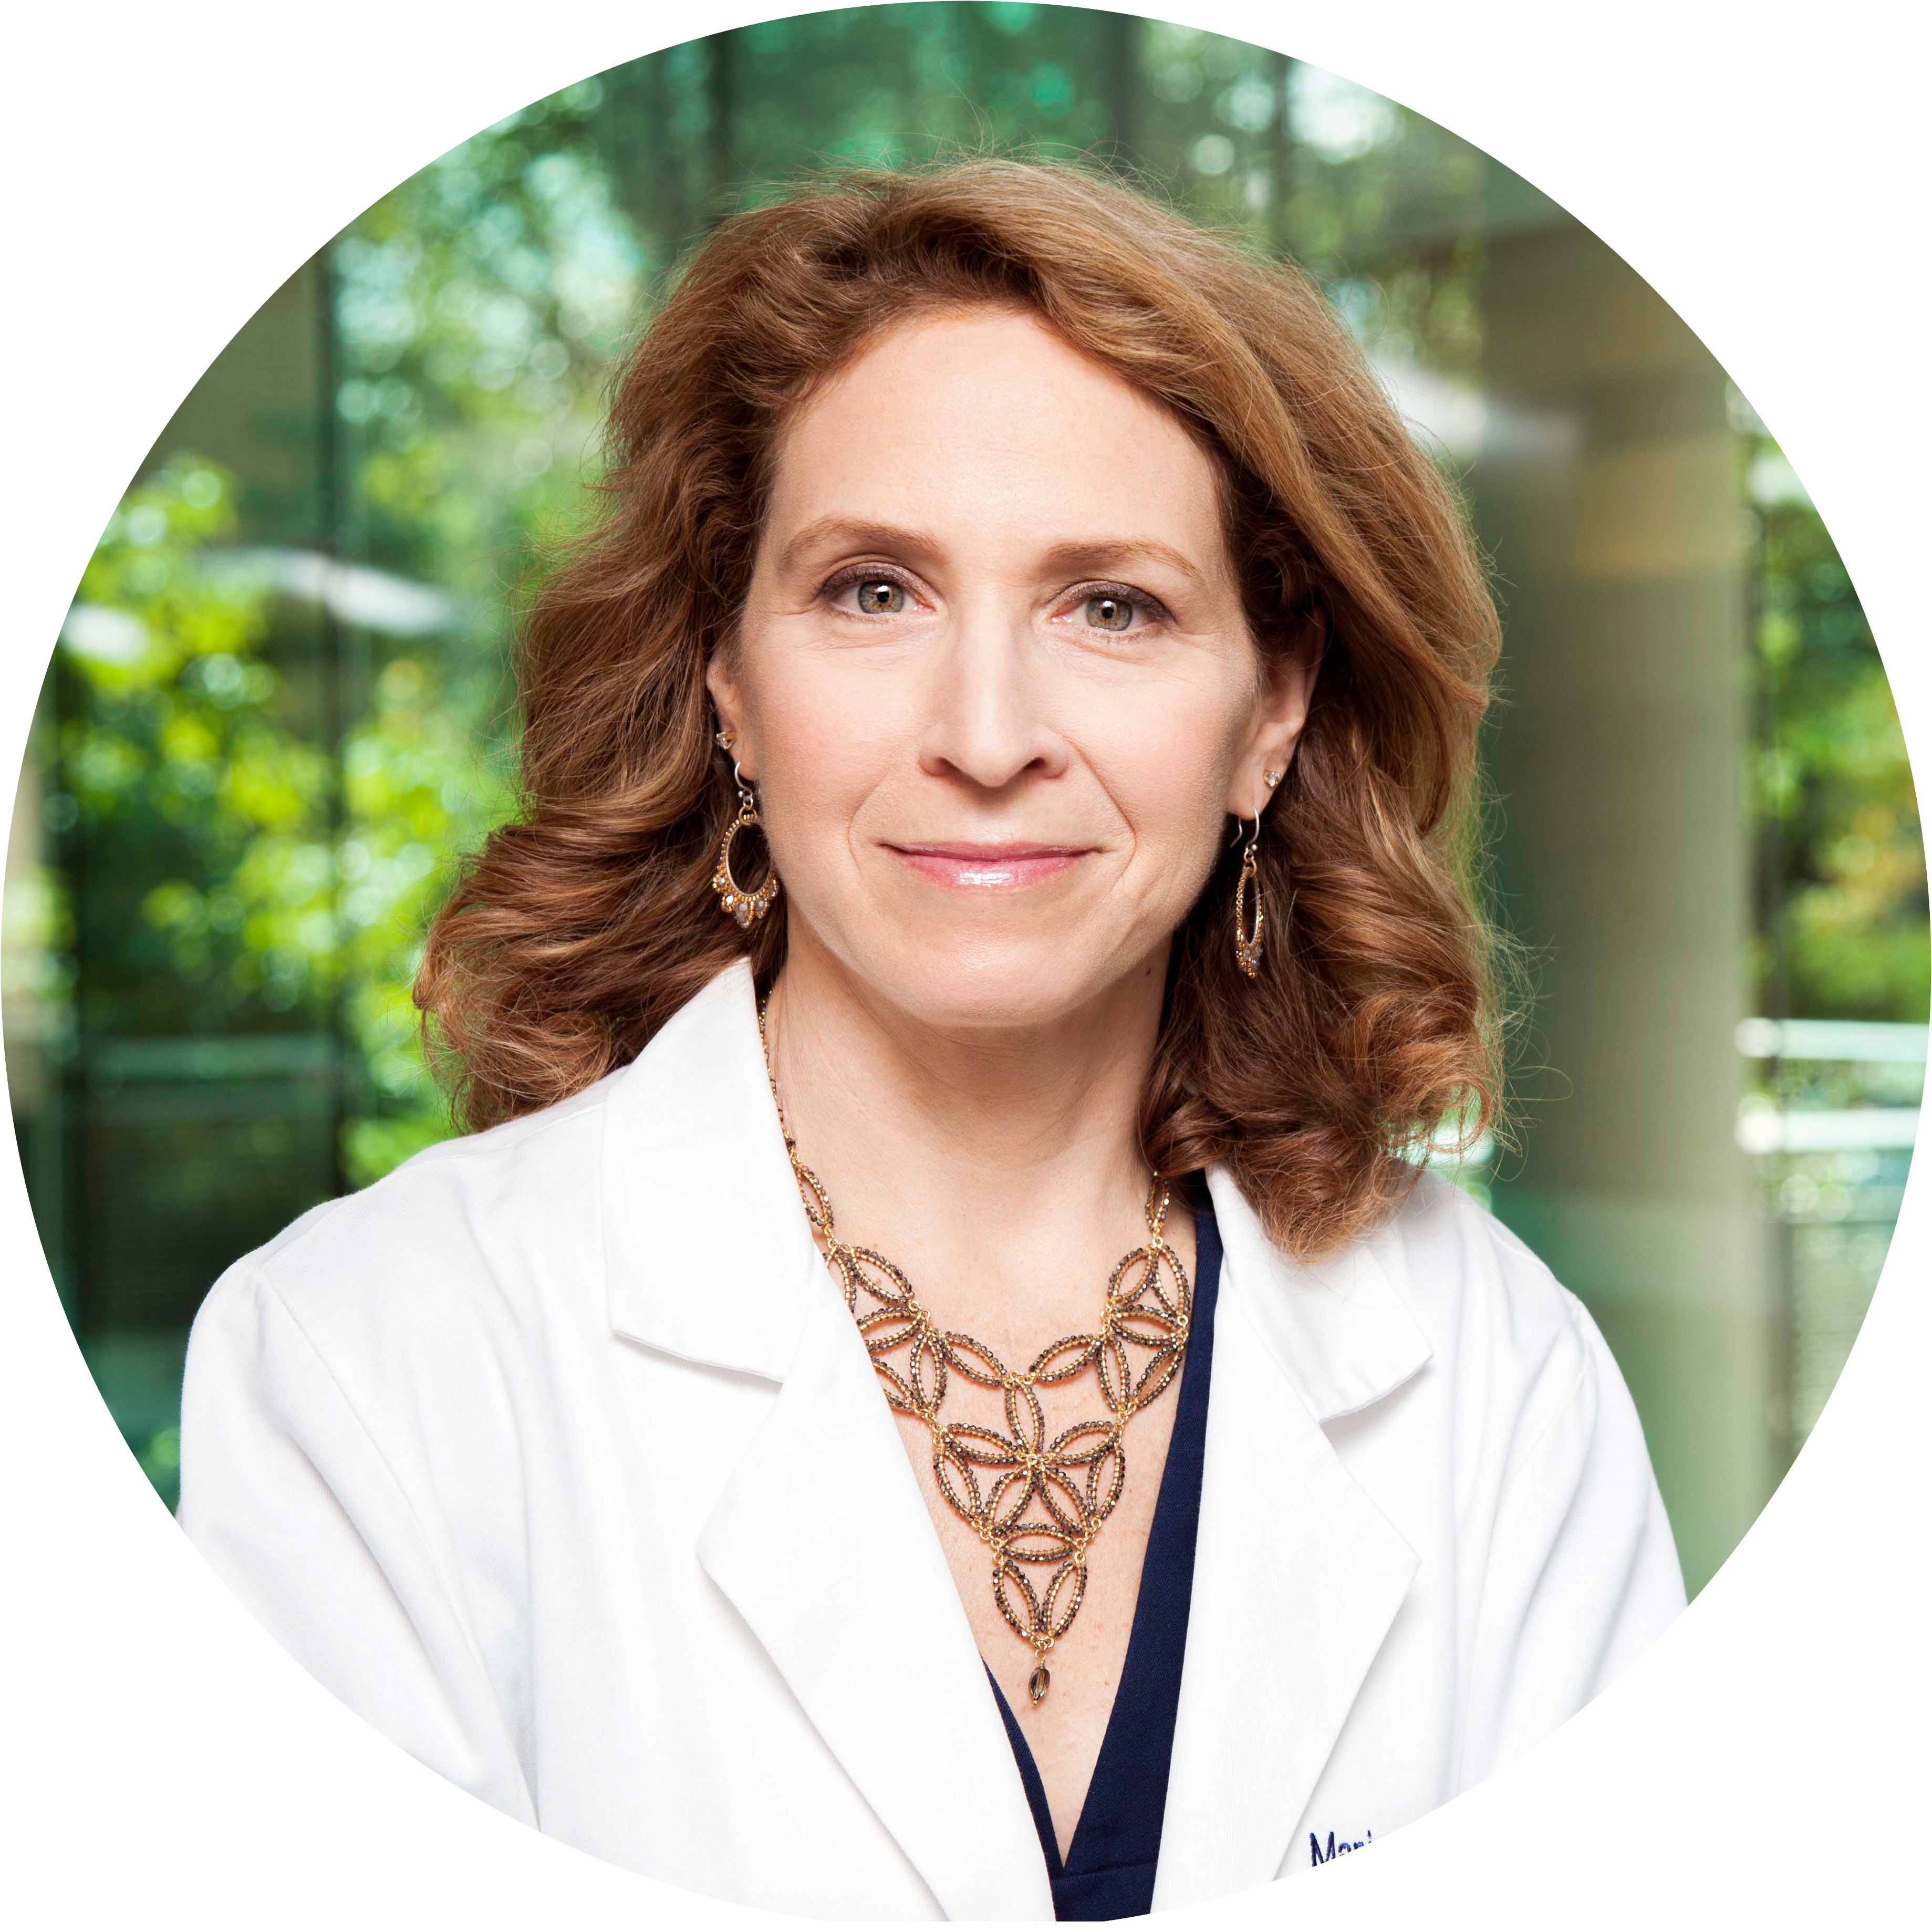 Marisa C. Weiss, M.D., chief medical officer and founder